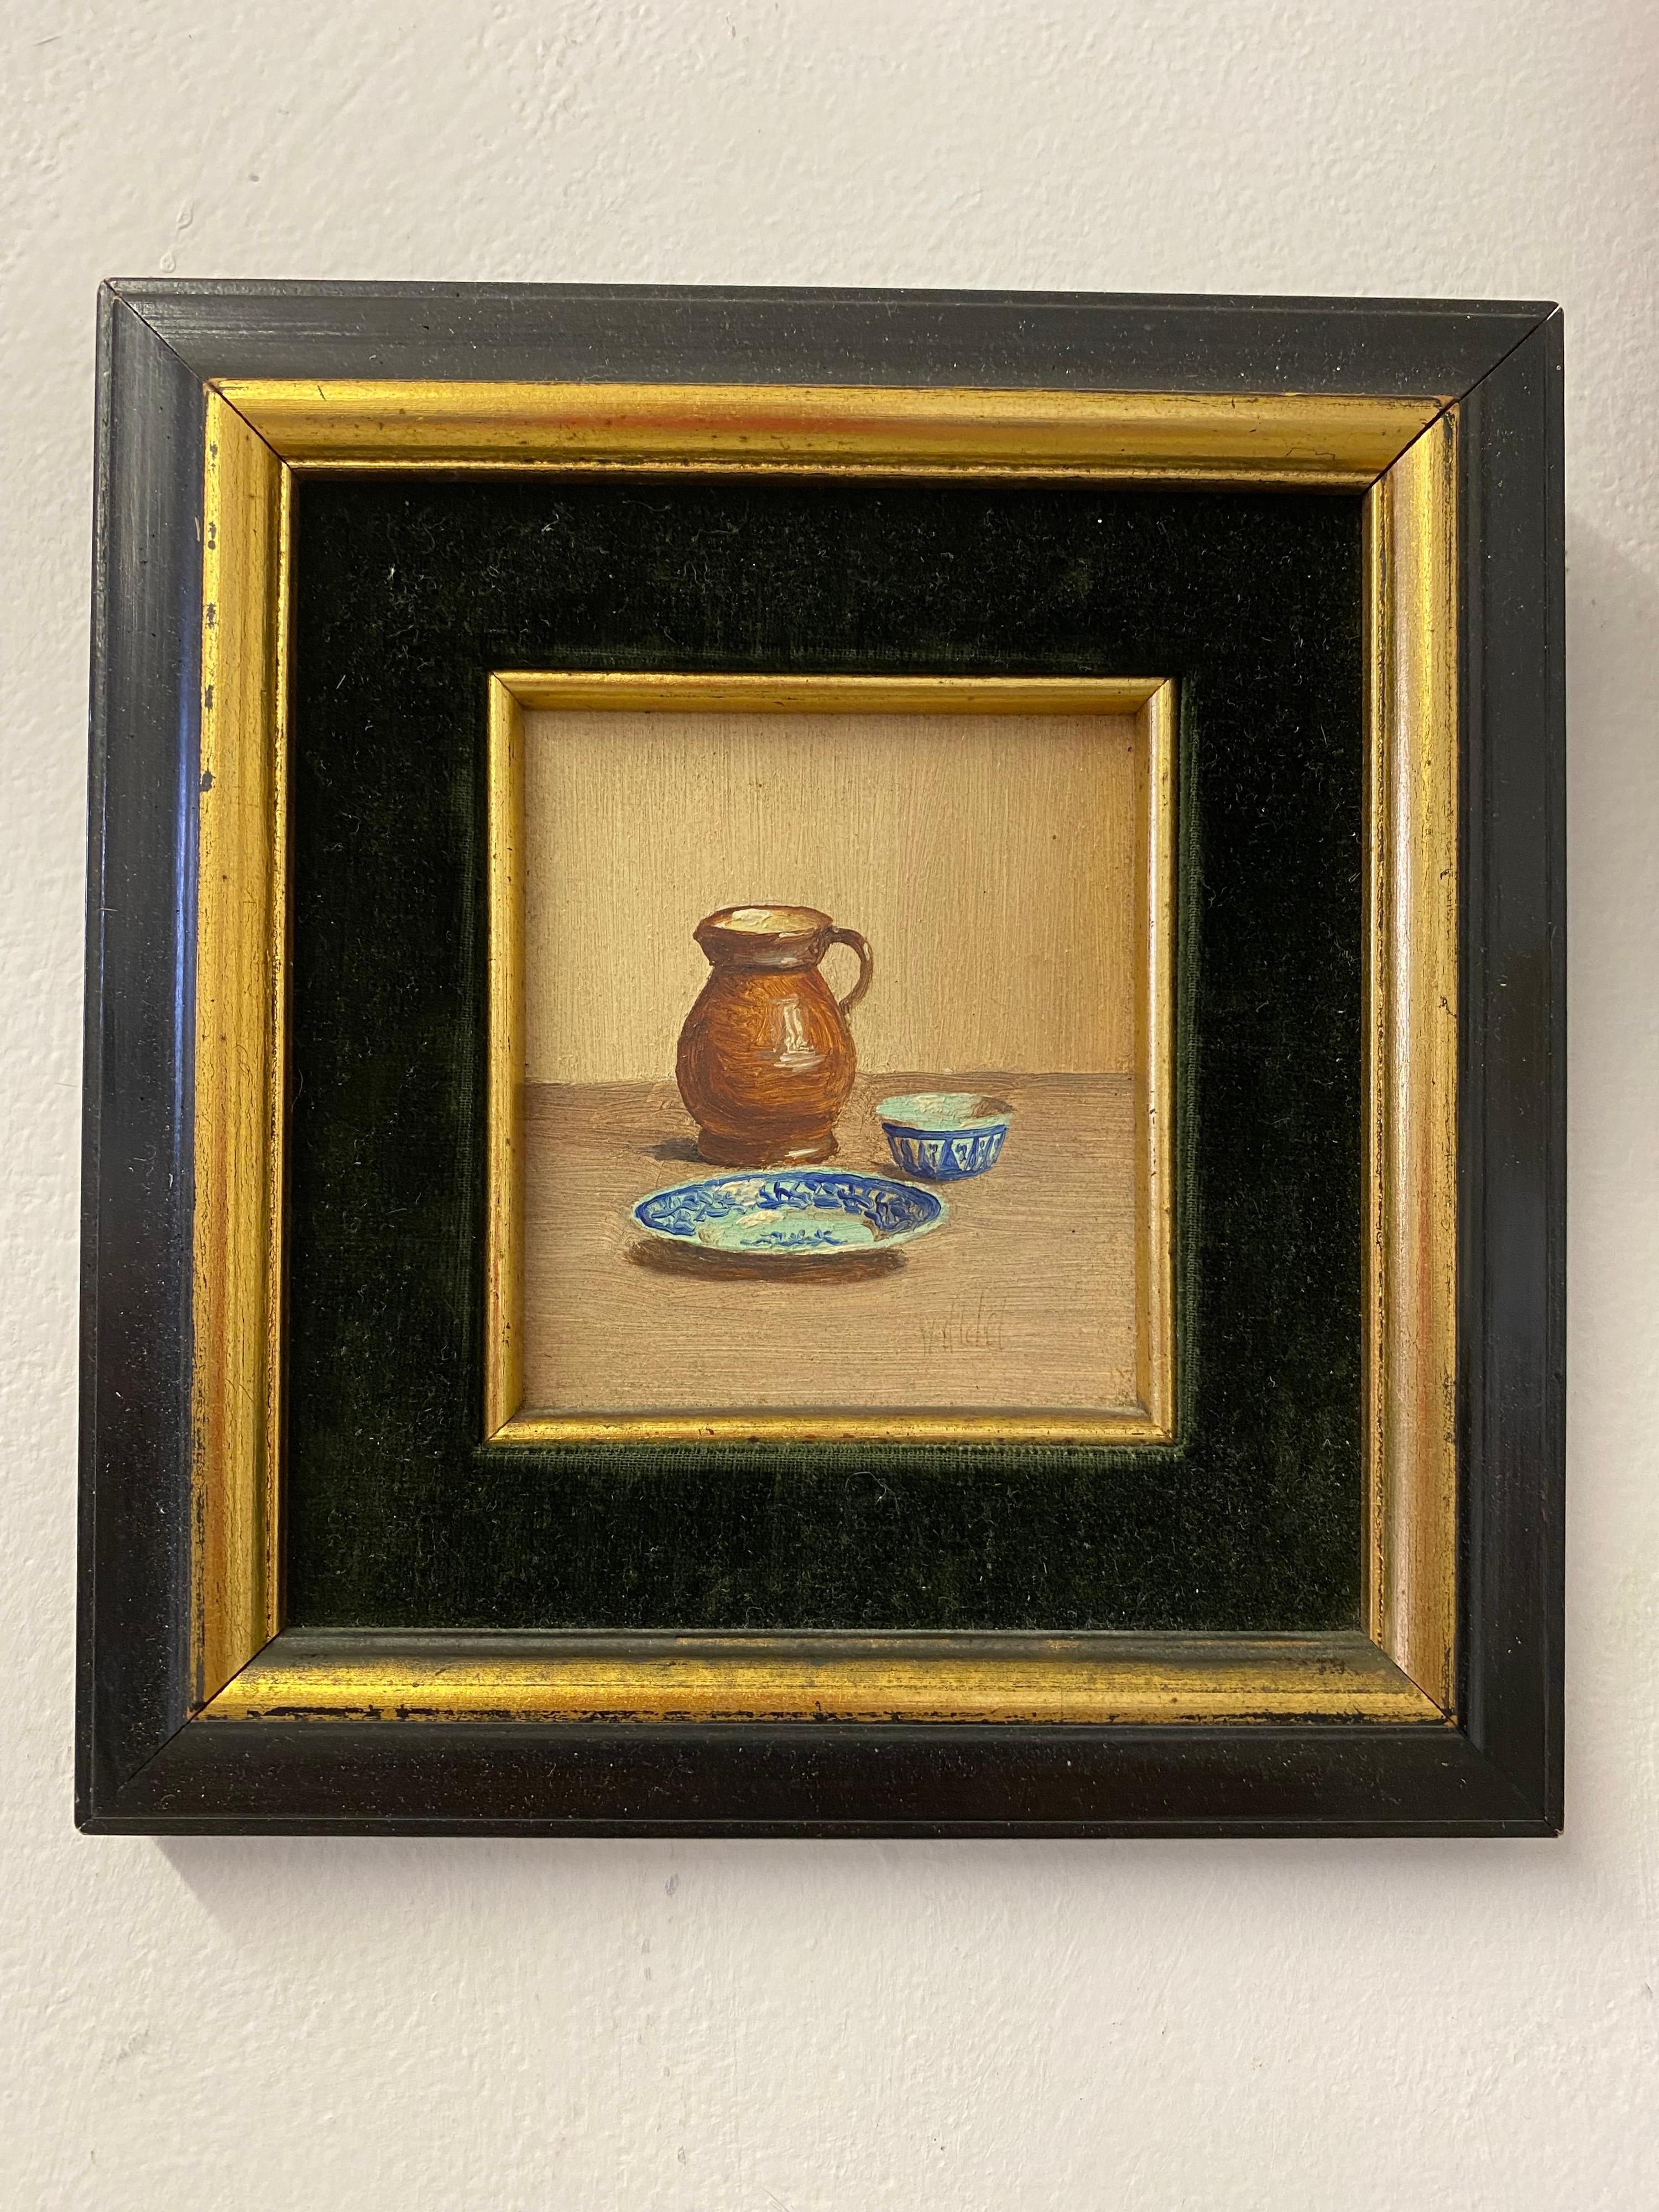 Set of 3 miniature still life table top paintings. Guessing the paintings are from the 1950's or 60's. Very nicely done, all three paintings are signed but hard to make out signature. Original frames with dark green felt liners. Frame sizes are 7 x